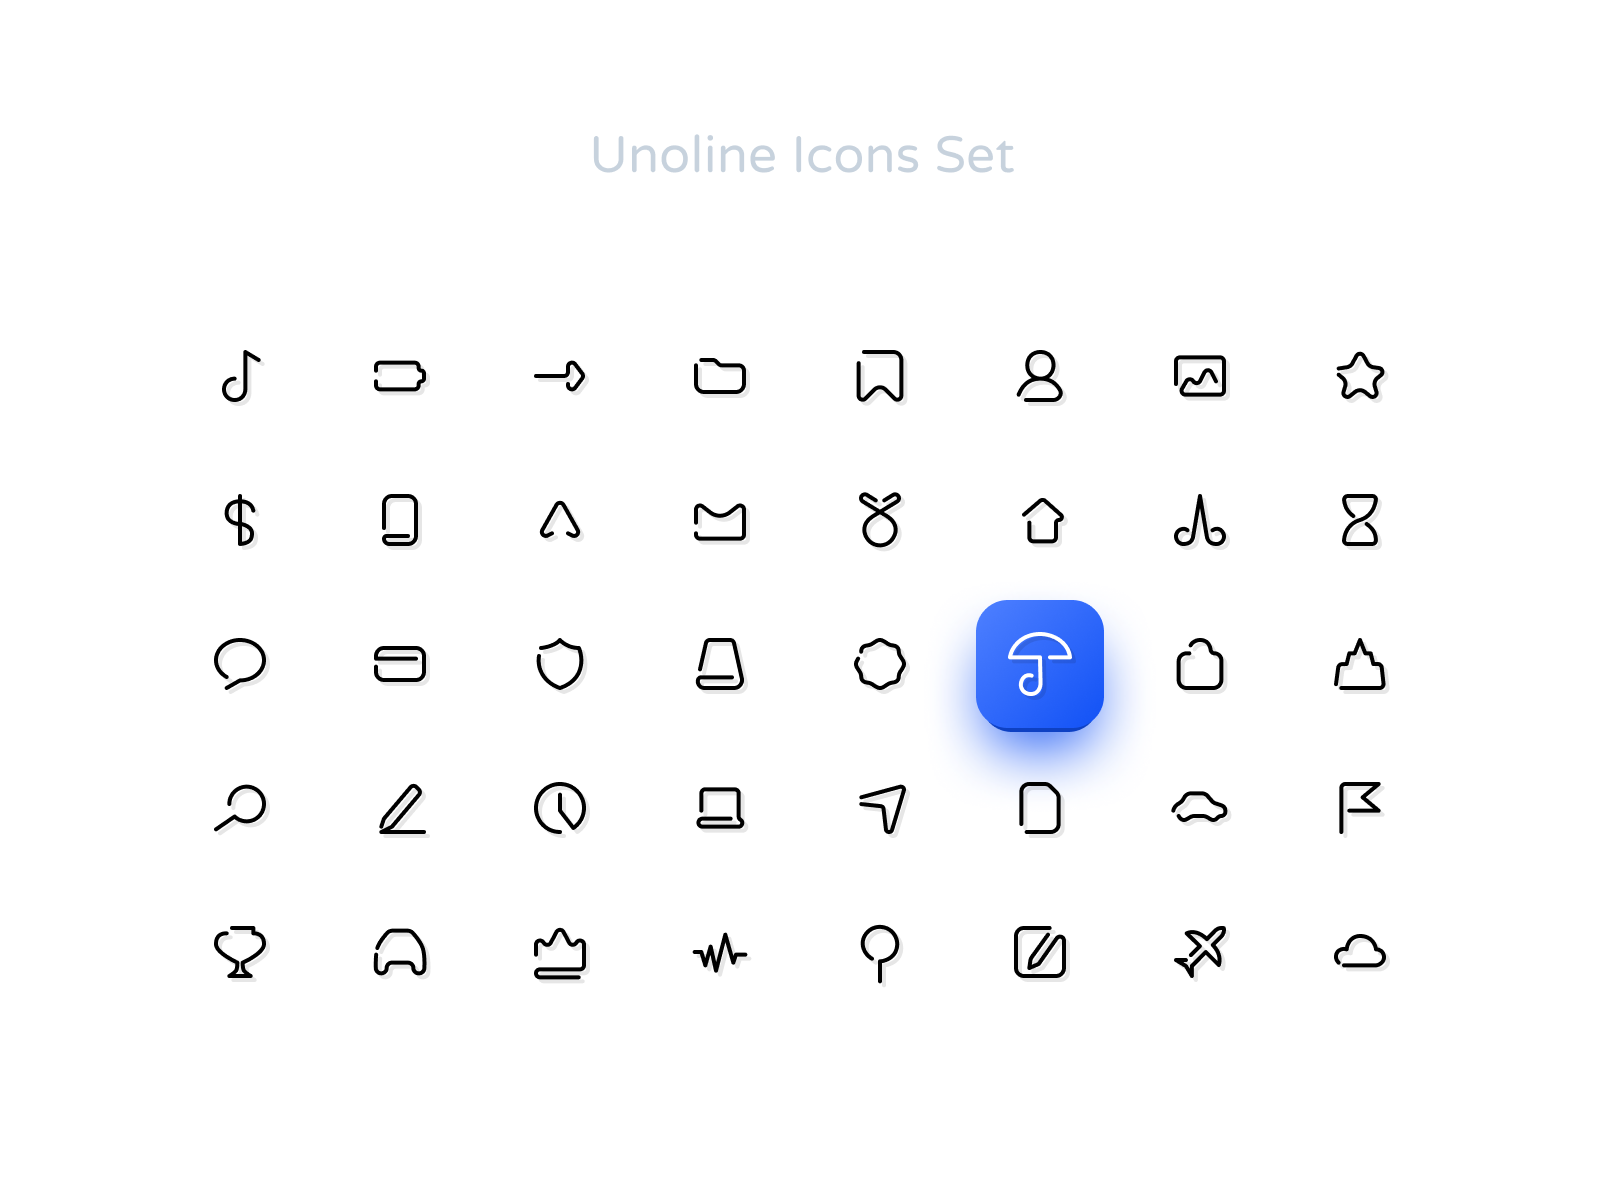 Unoline Icons Set - save 50% adobexd business demo essential figma figmadesign free icon iconjar icons invision lines livestroke oneline sketch stroke ui vector